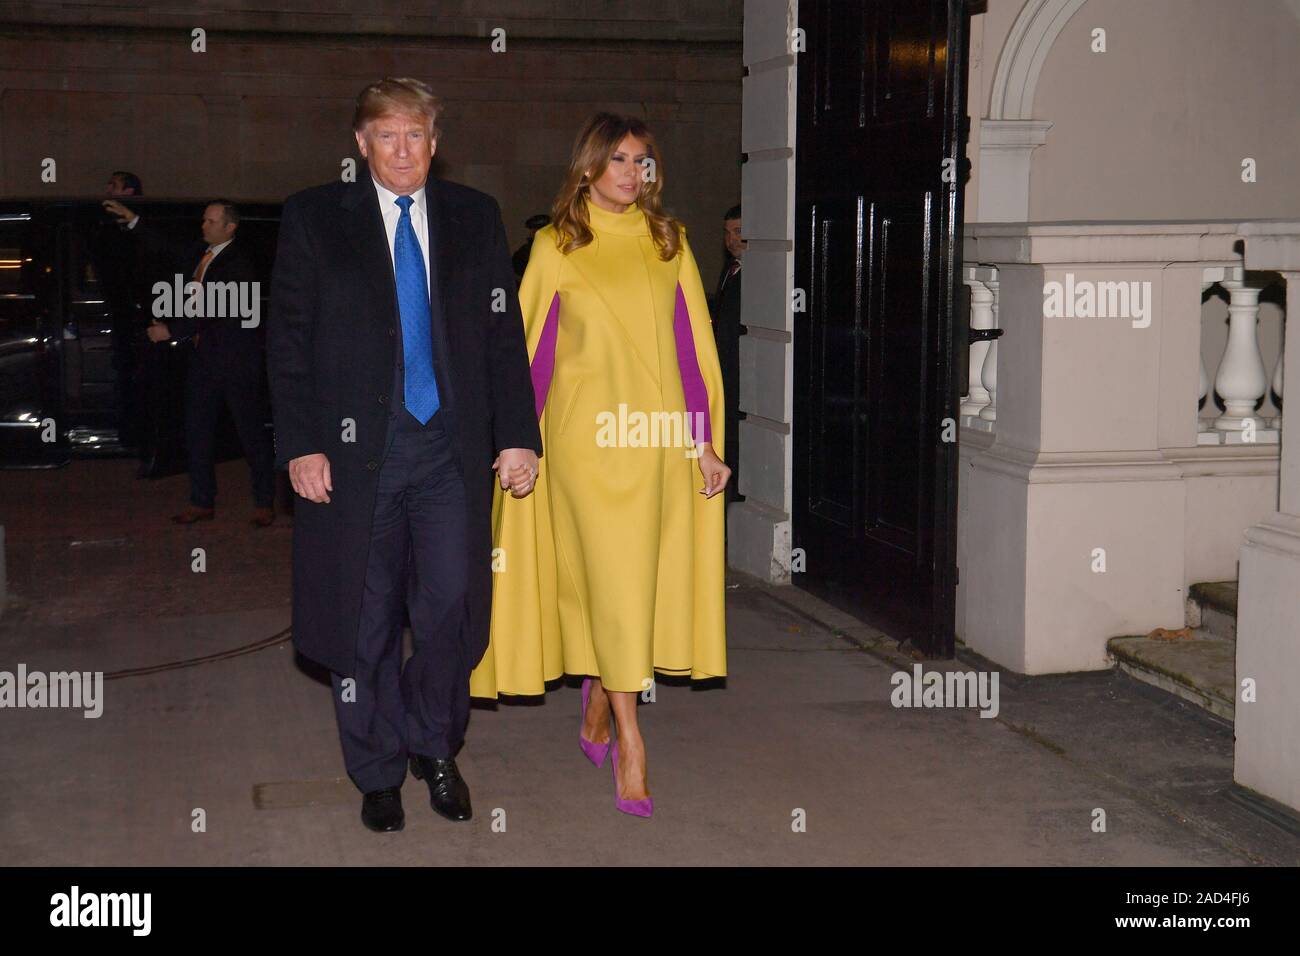 US President Donald Trump and wife Melania arrive at Clarence House, central London, to meet the Prince of Wales and the Duchess of Cornwall as Nato leaders gather to mark 70 years of the alliance. PA Photo. Picture date: Tuesday December 3, 2019. Photo credit should read: Victoria Jones/PA Wire Stock Photo